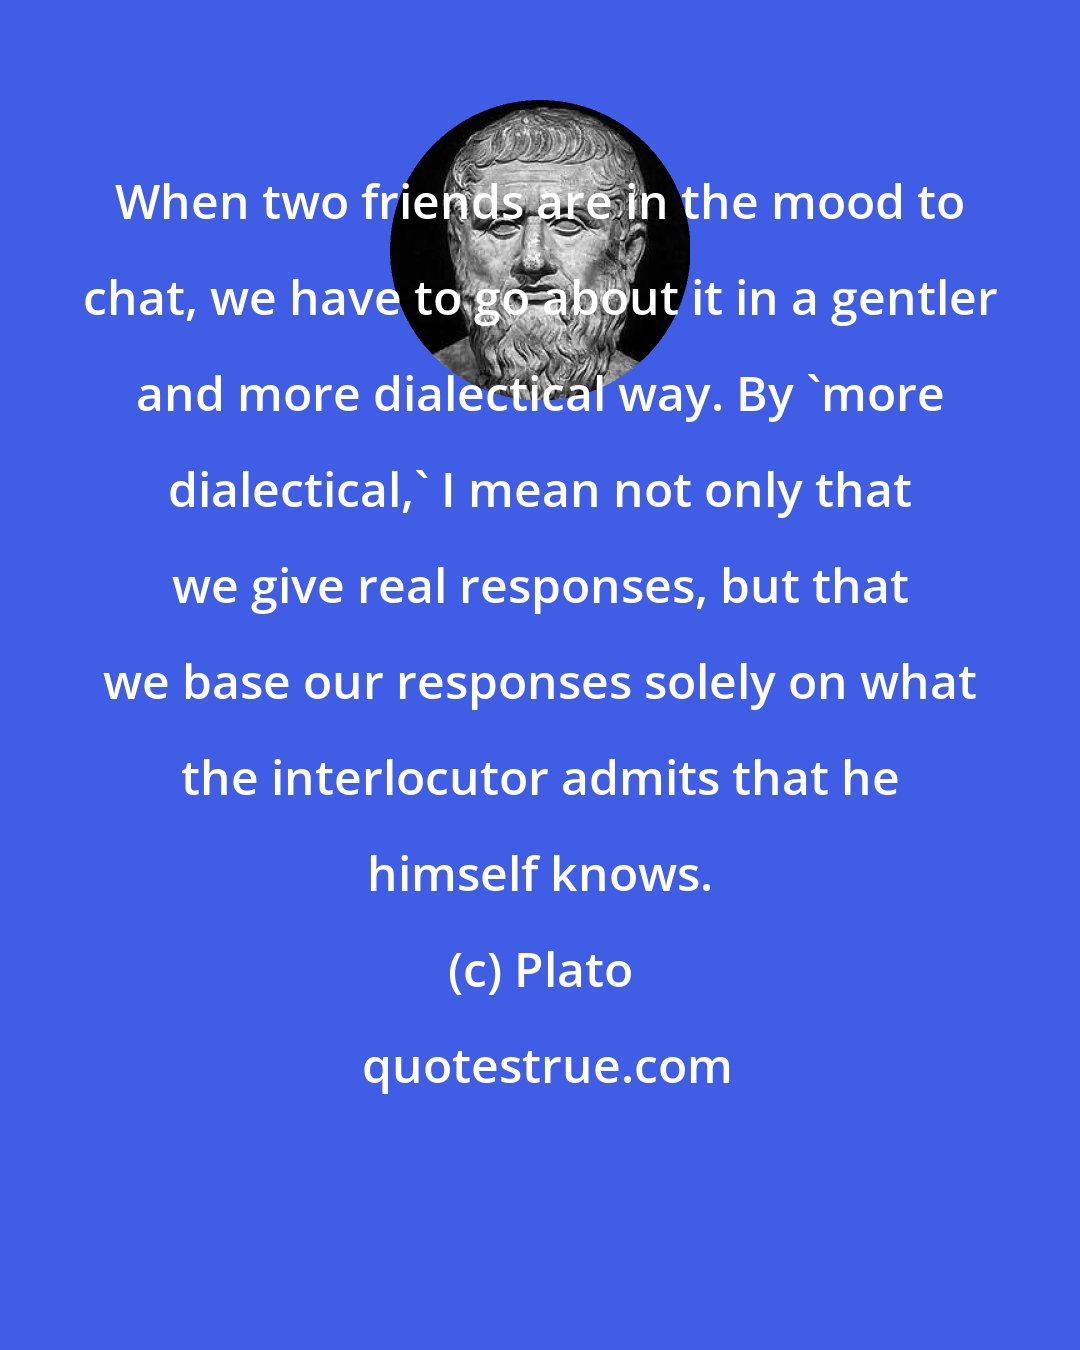 Plato: When two friends are in the mood to chat, we have to go about it in a gentler and more dialectical way. By 'more dialectical,' I mean not only that we give real responses, but that we base our responses solely on what the interlocutor admits that he himself knows.